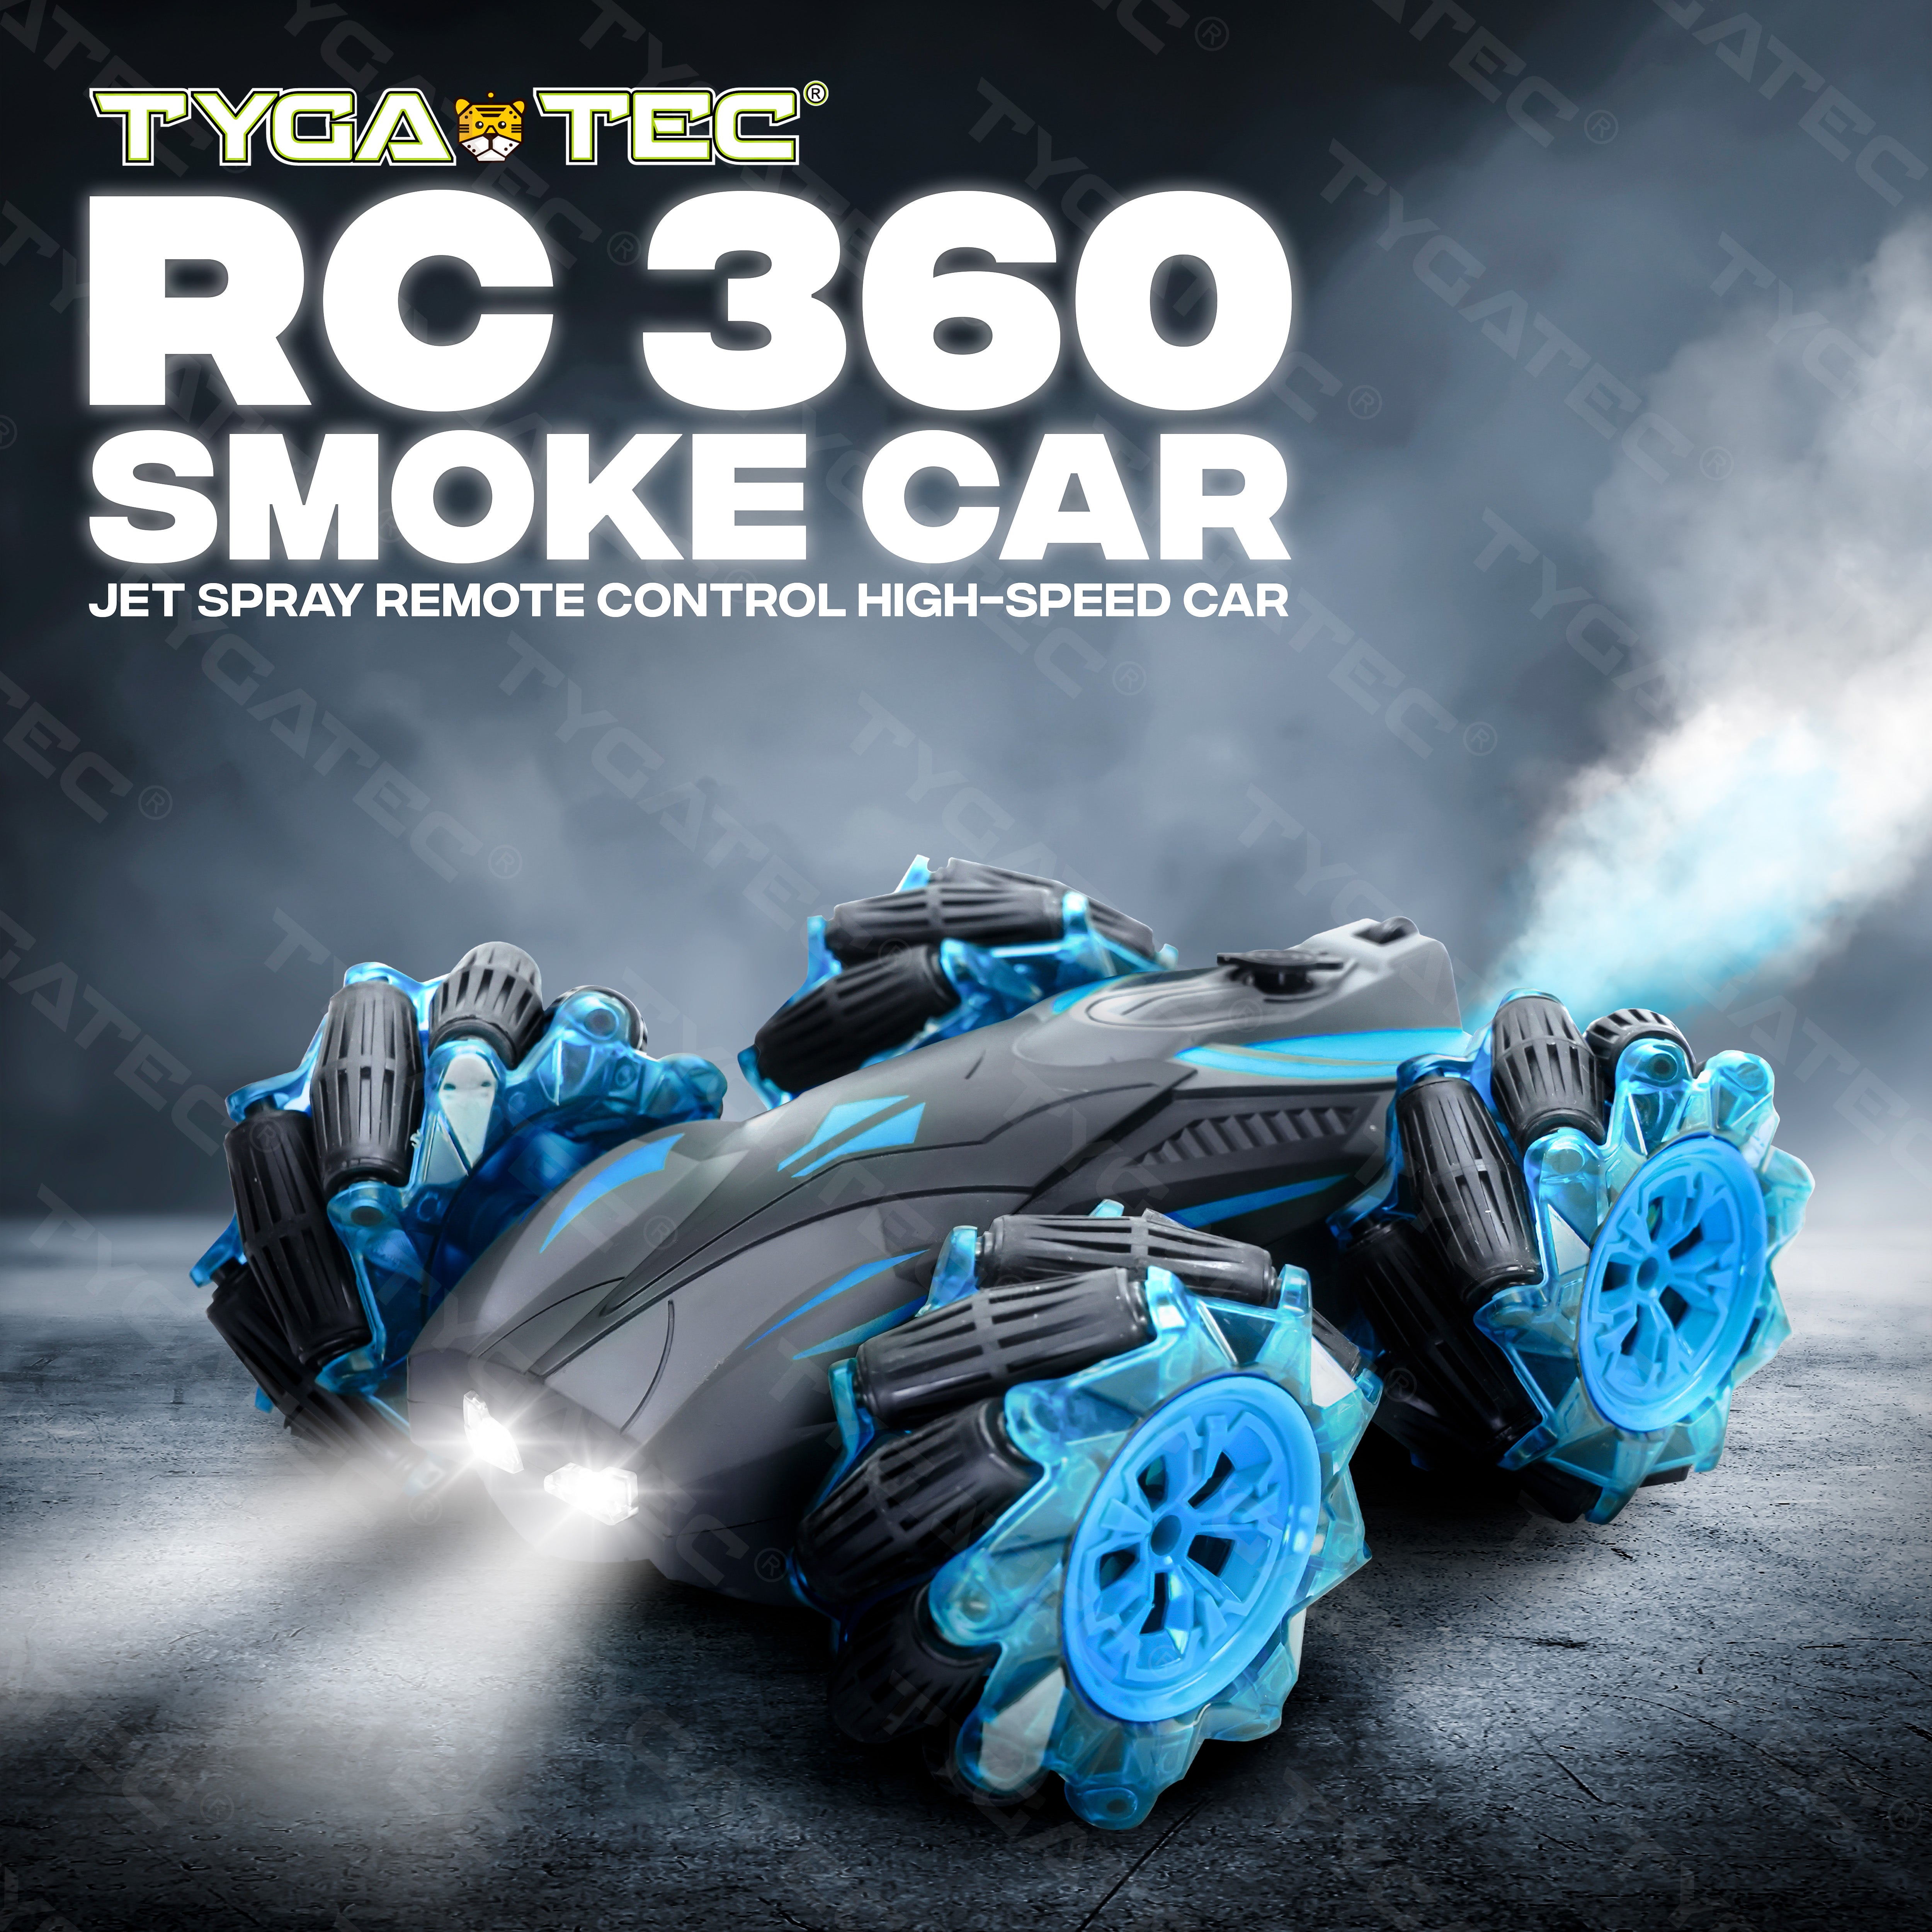 Tygatec Stunt Remote Control Toy Car With Smoke And Led Lights For Kids (Color Blue)